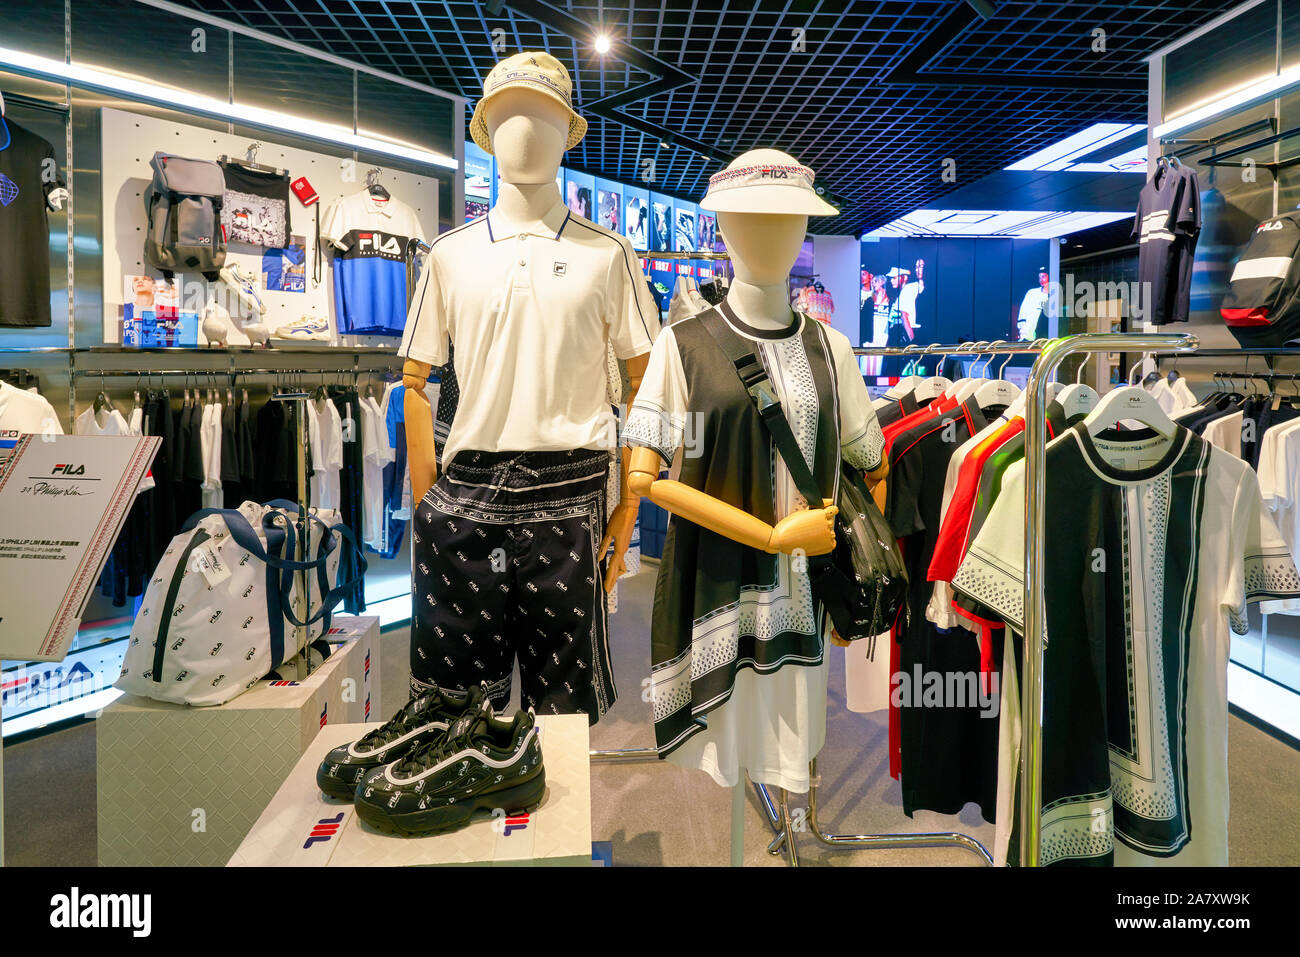 SHENZHEN, CHINA - APRIL, 2019: interior shot of Fila store at a shopping mall in Shenzhen. Fila is an Italian sporting goods company Stock Photo - Alamy